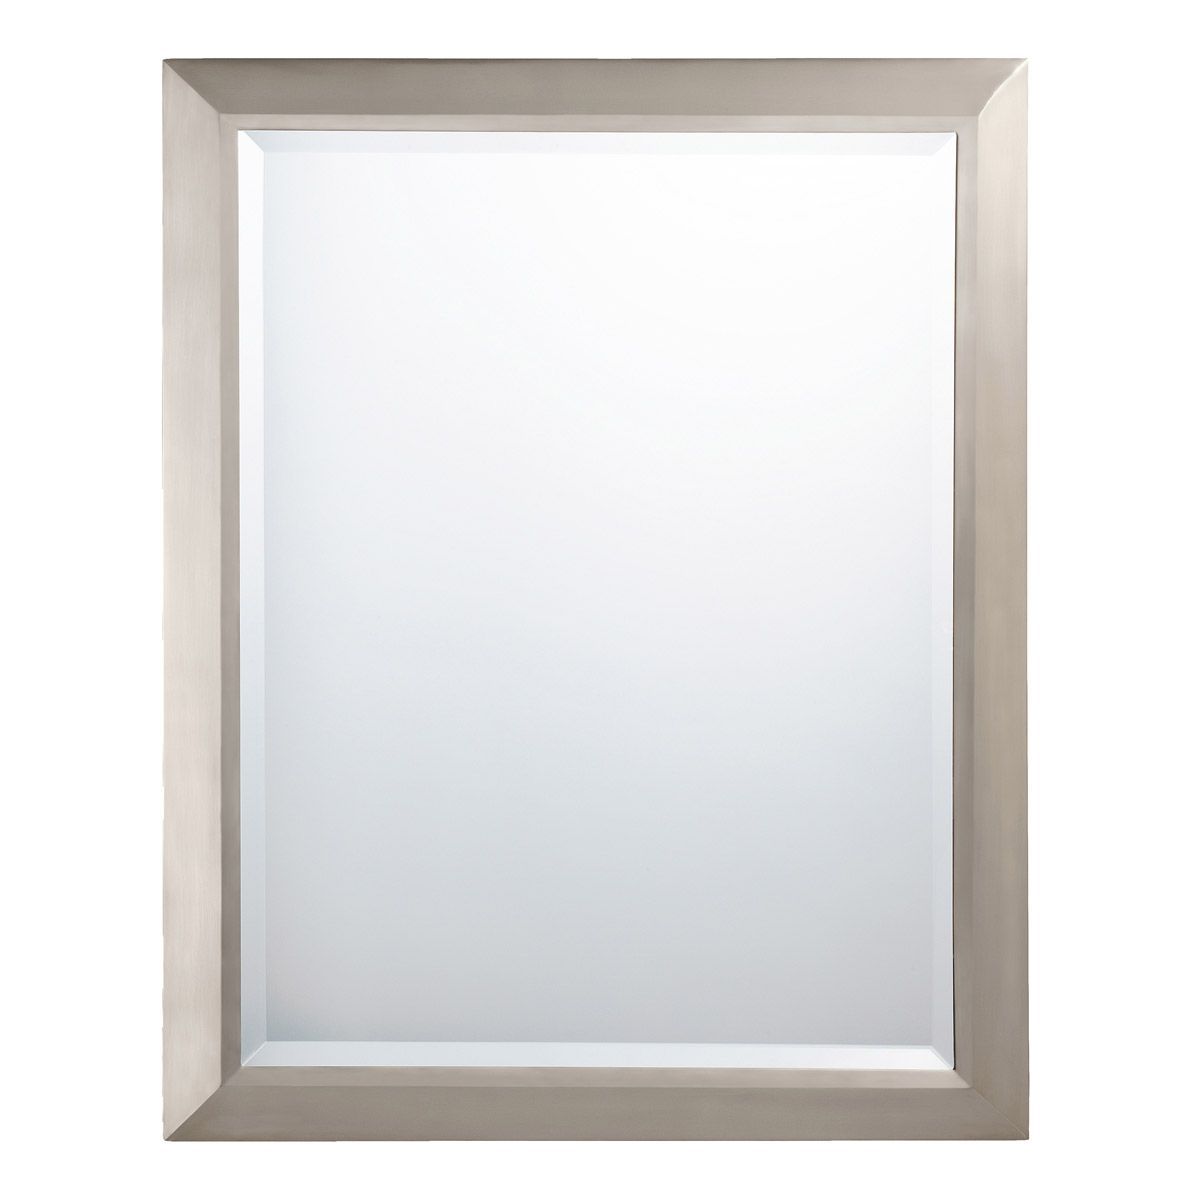 Independence 30 X 24 Inch Brushed Nickel Wall Mirror | Mirror Design With Regard To Hogge Modern Brushed Nickel Large Frame Wall Mirrors (View 7 of 15)